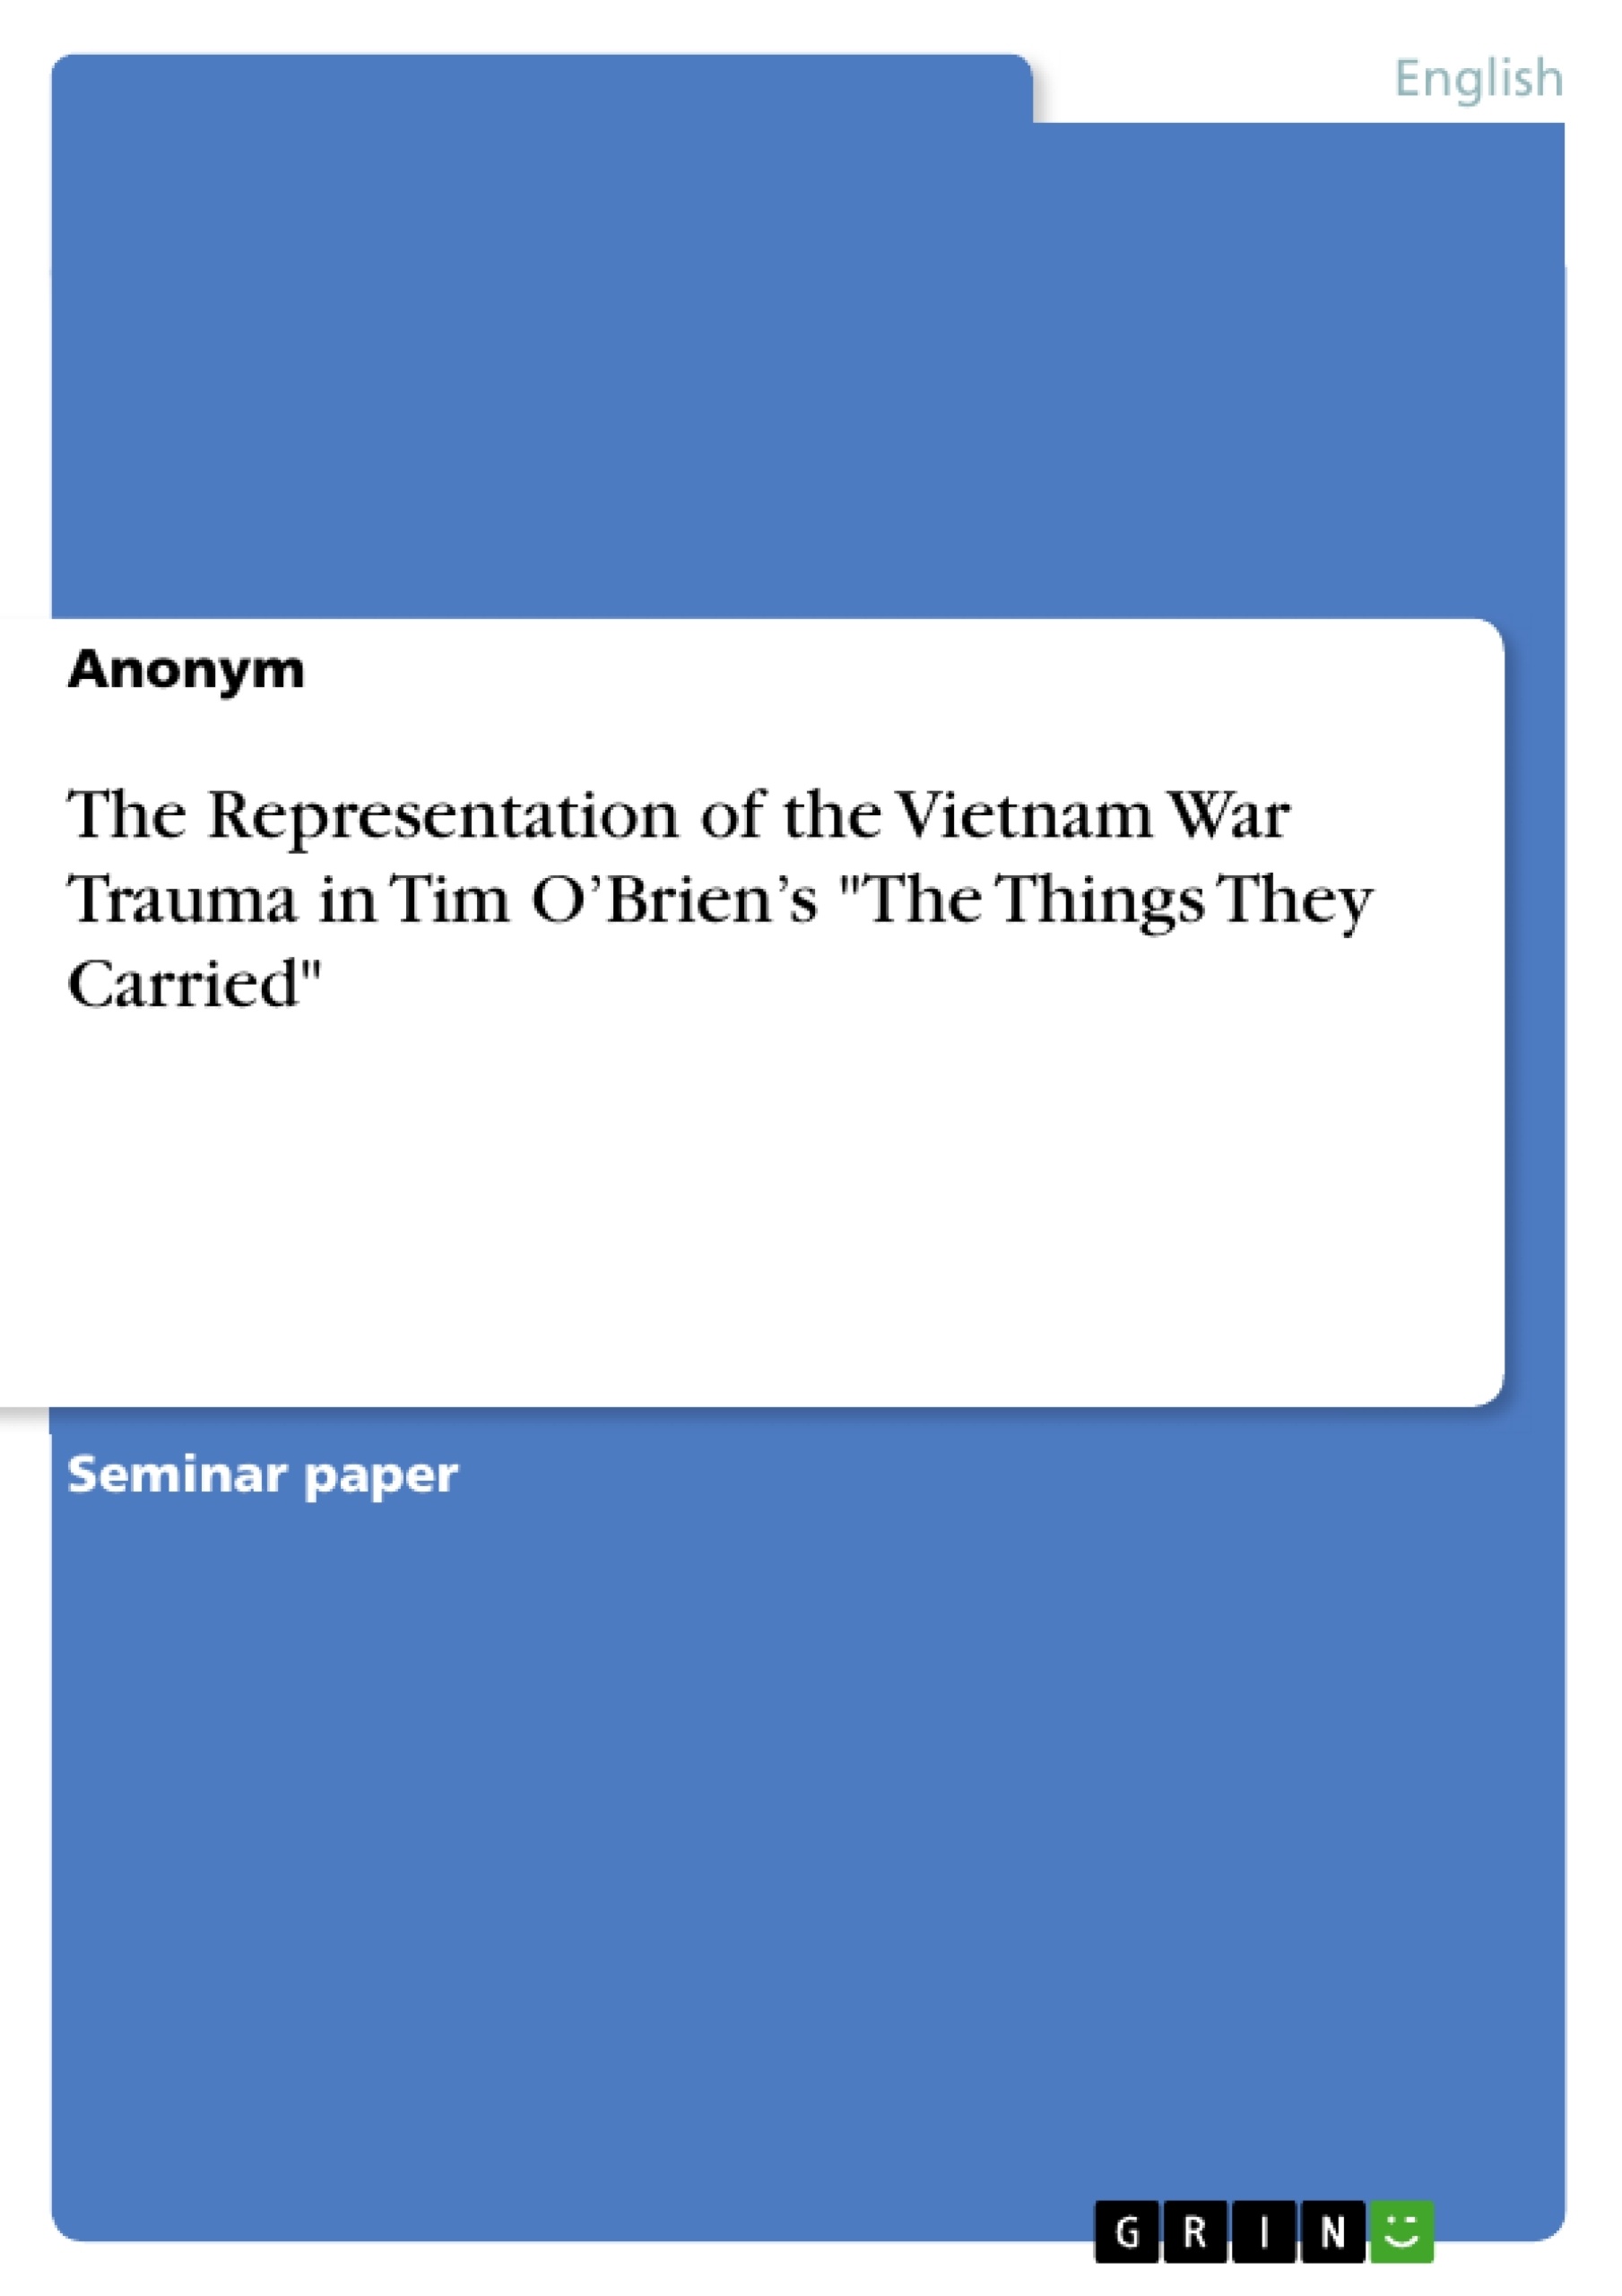 Titre: The Representation of the Vietnam War Trauma in Tim O’Brien’s "The Things They Carried"